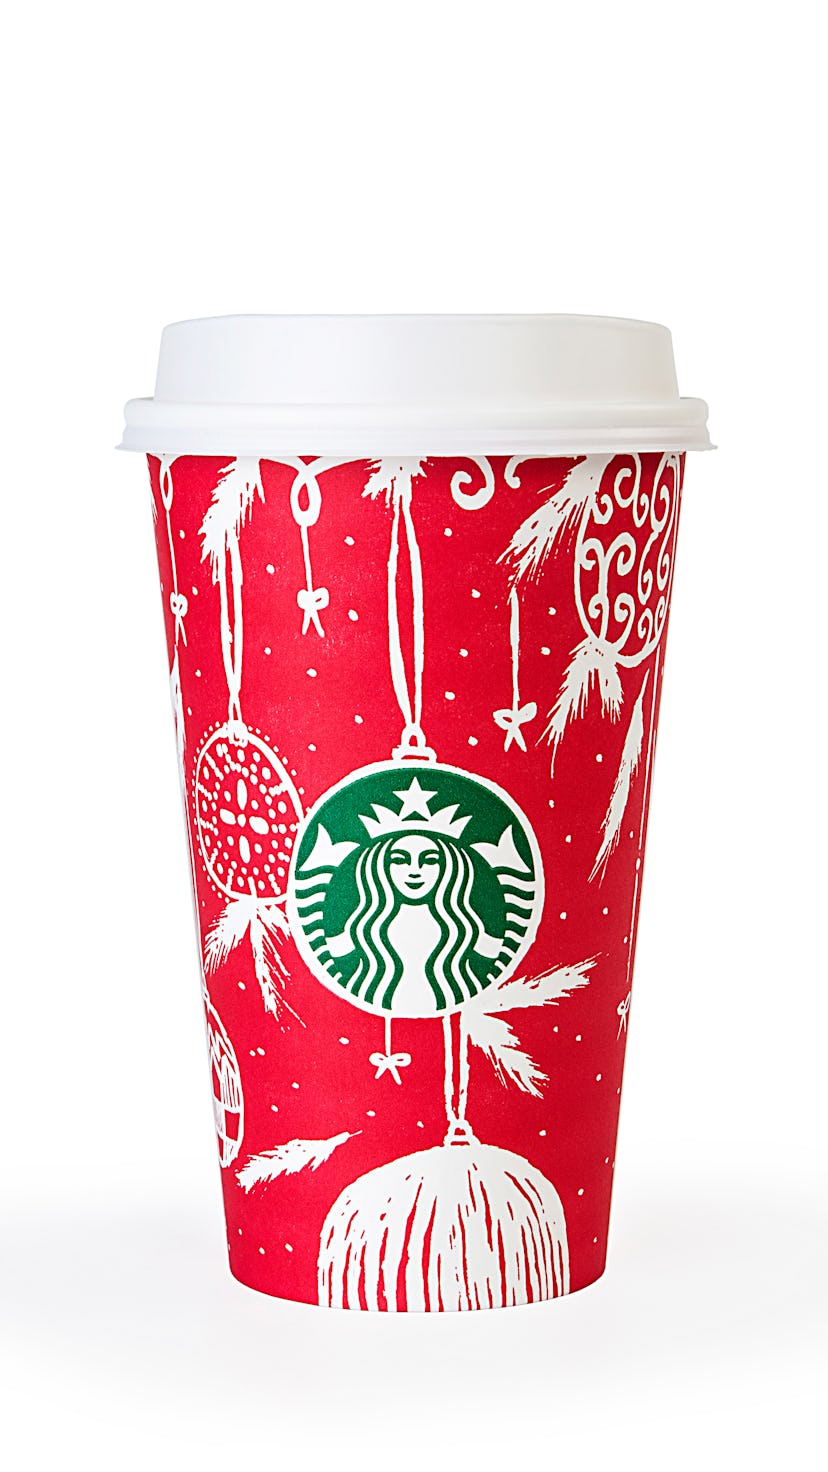 Starbucks coffee cup with christmas decorative motives

